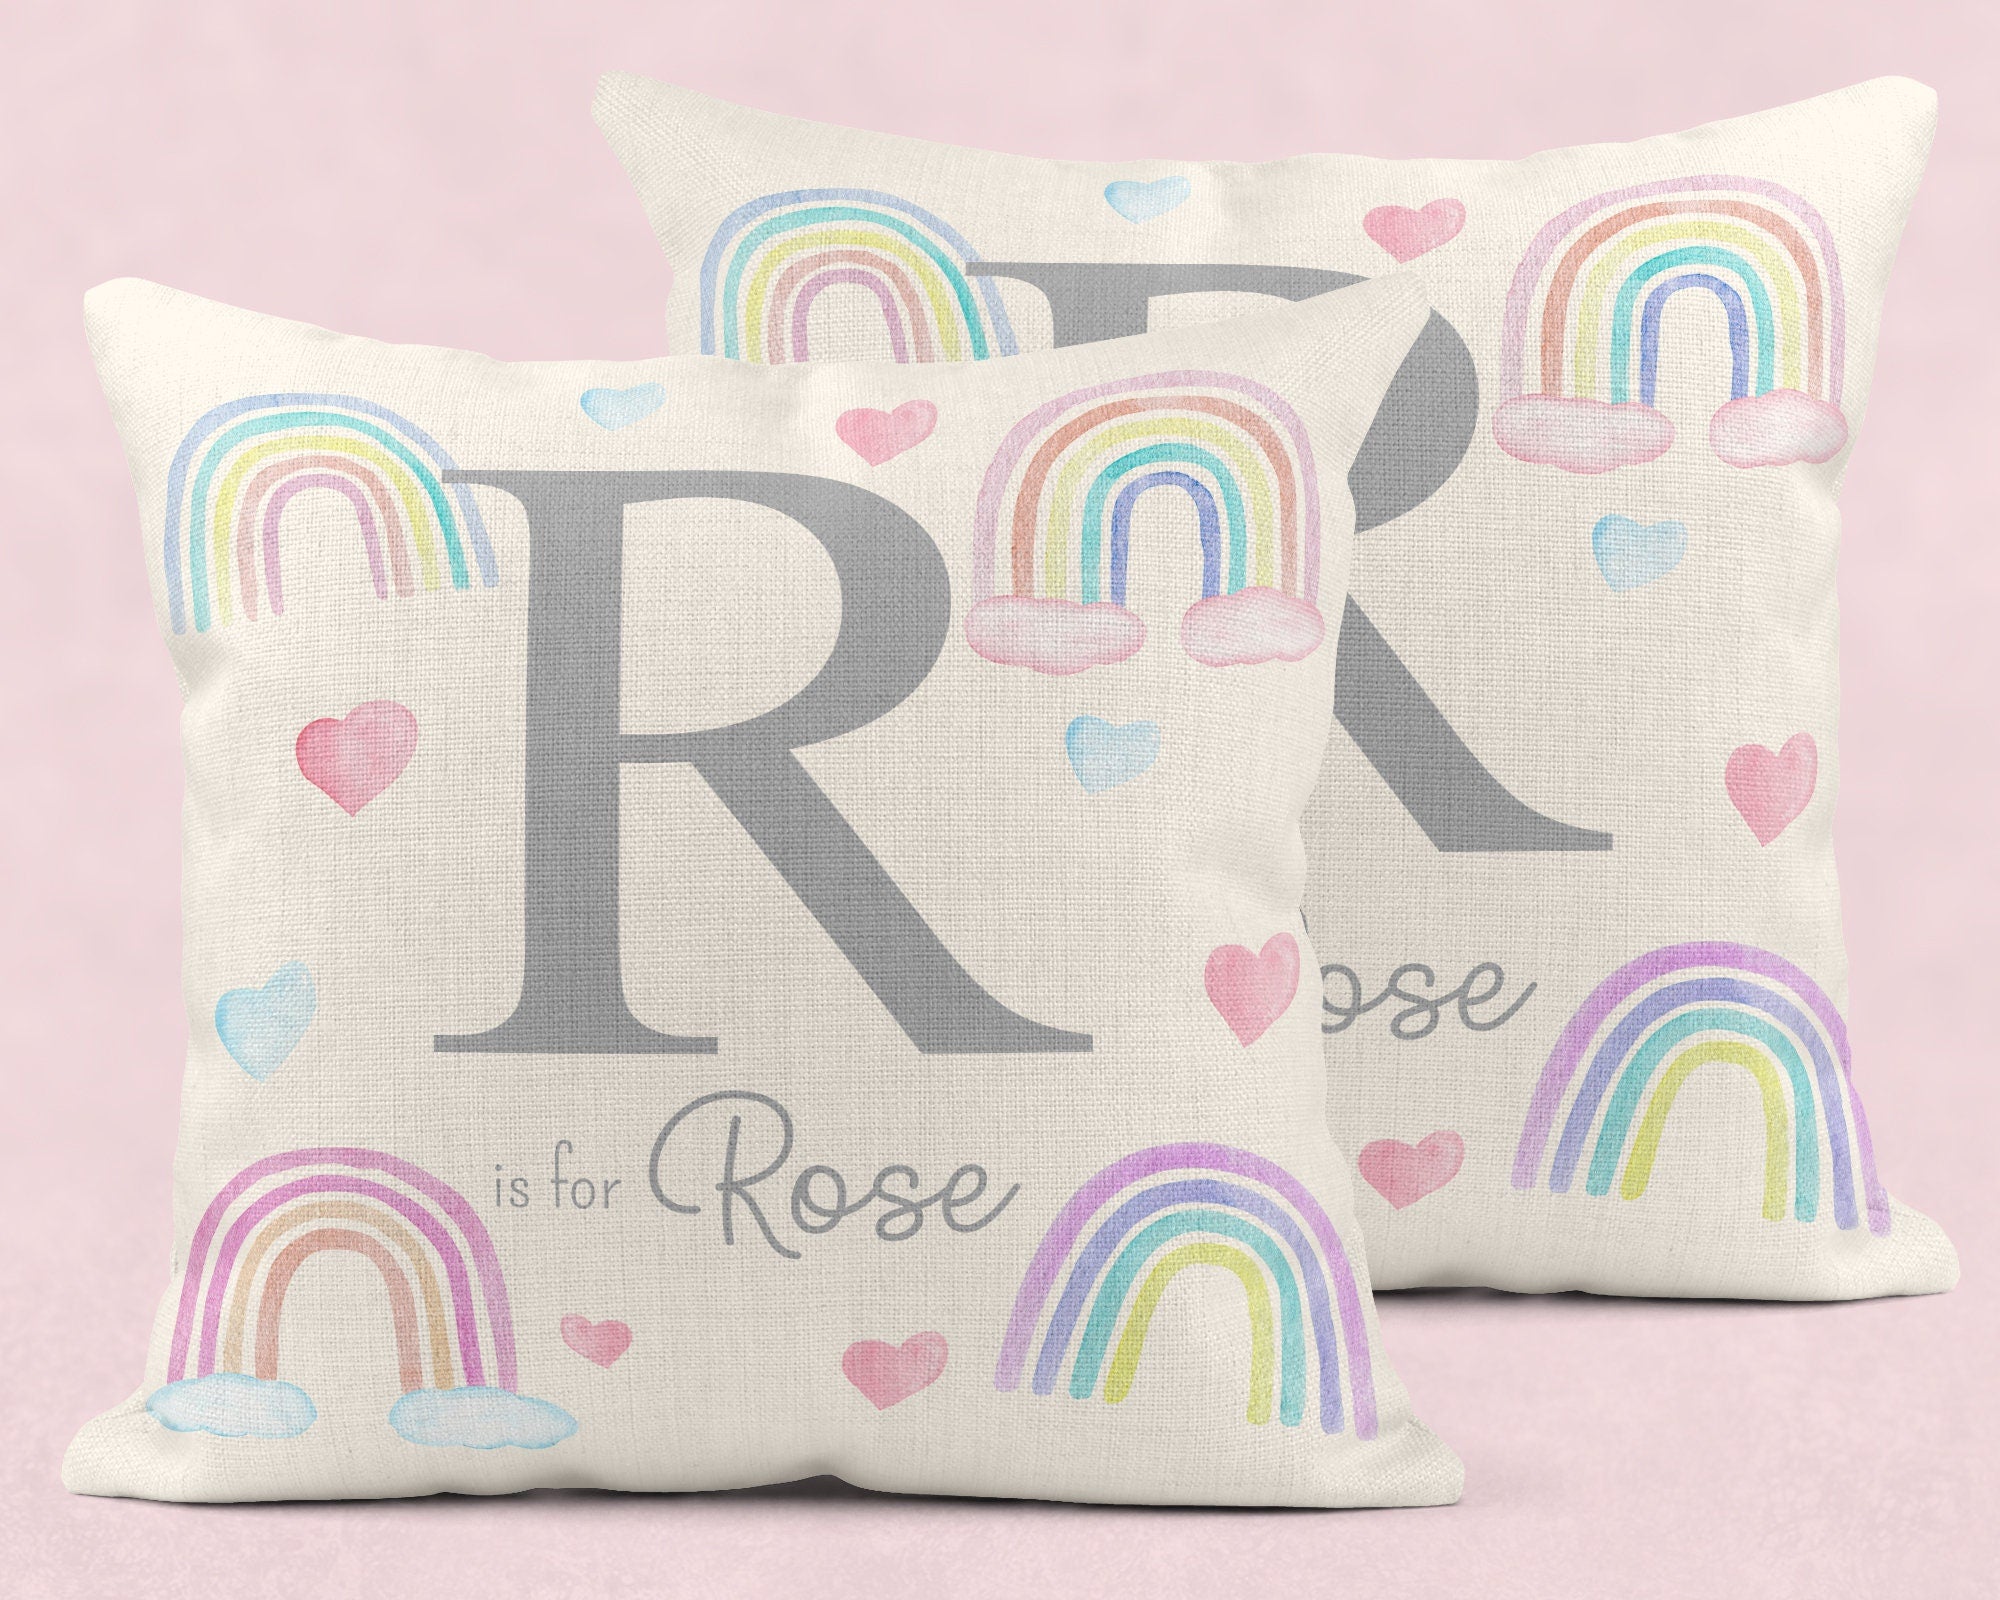 Personalised New Baby Cushion, Welcome To The World Cushion, New Baby Gifts, Rainbow Cushion, New Baby Present, Rainbow Nursery Decor